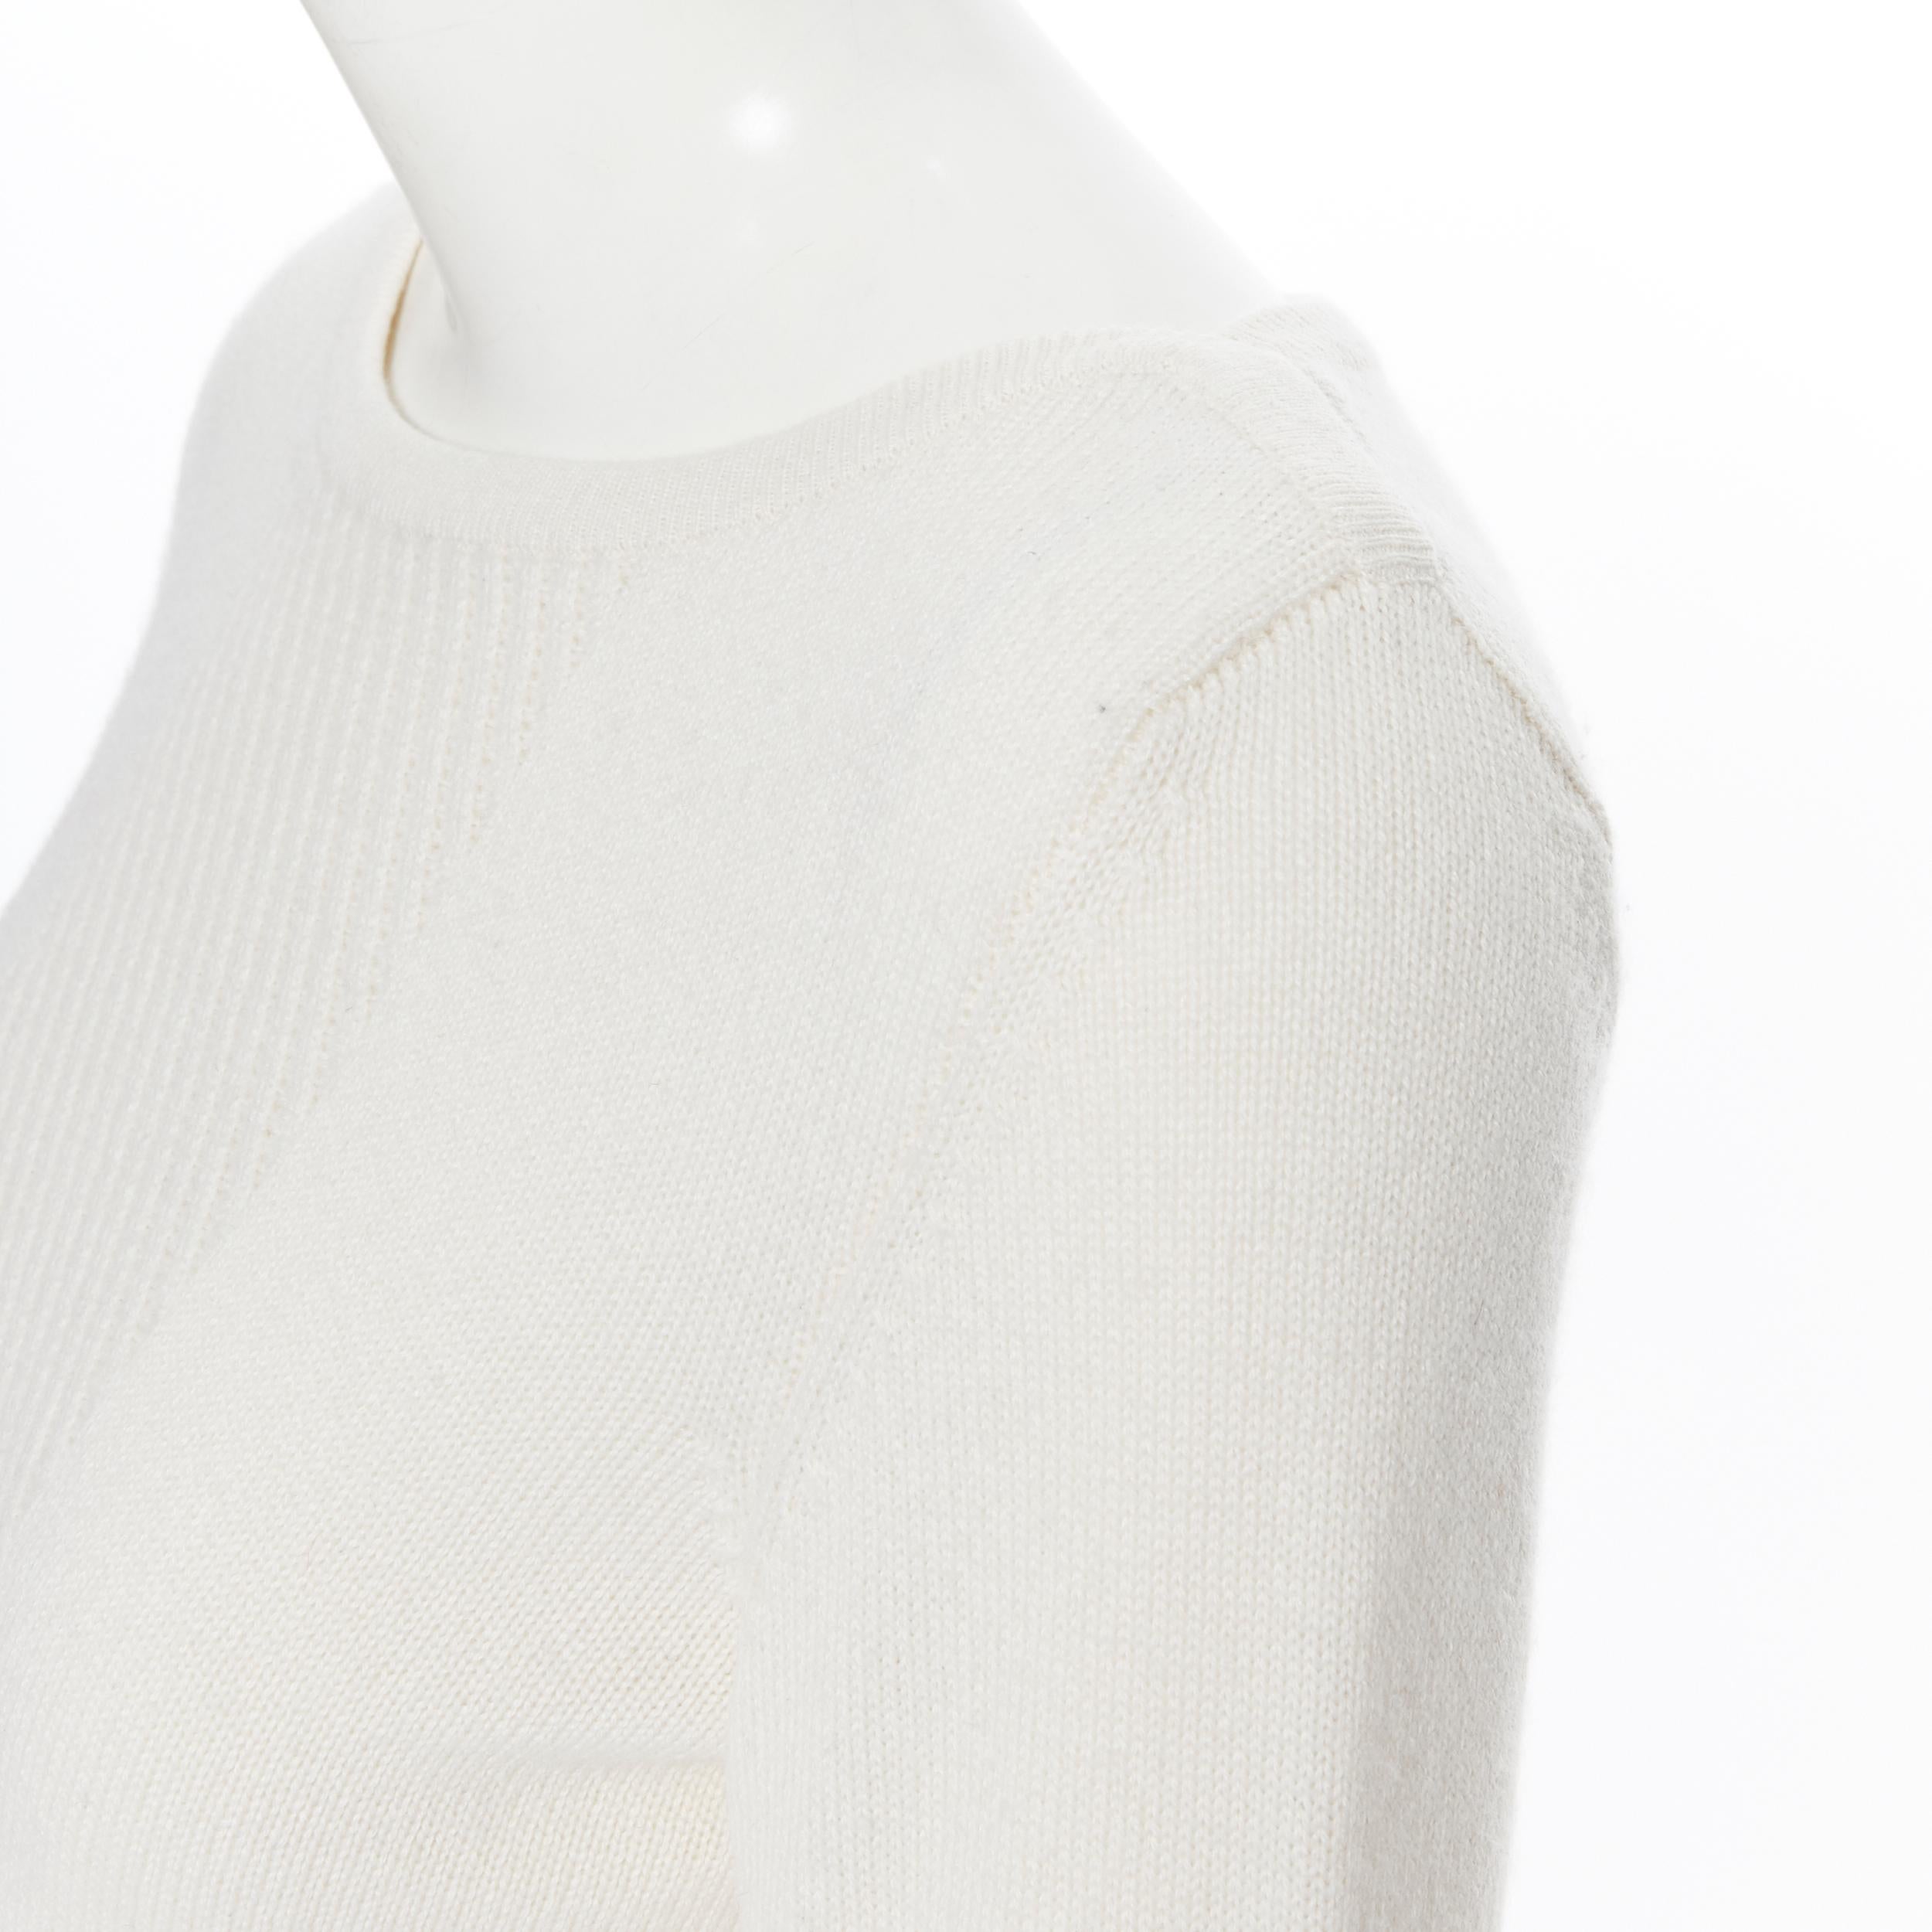 HERMES 100% cashmere ivory beige ribbed panel silver H charm sweater FR34 XS For Sale 2